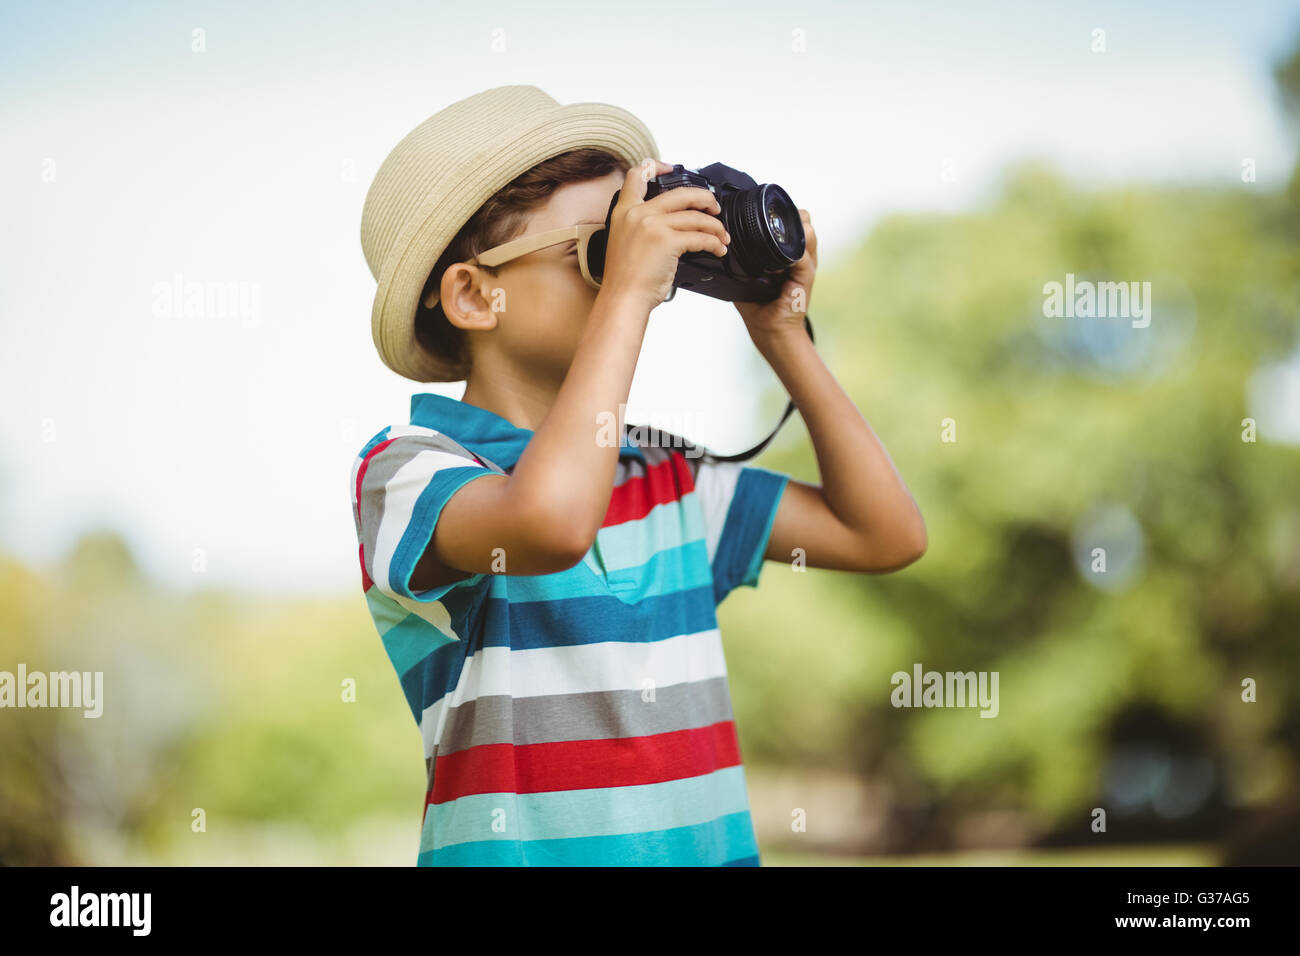 Young boy clicking a photograph from camera Stock Photo